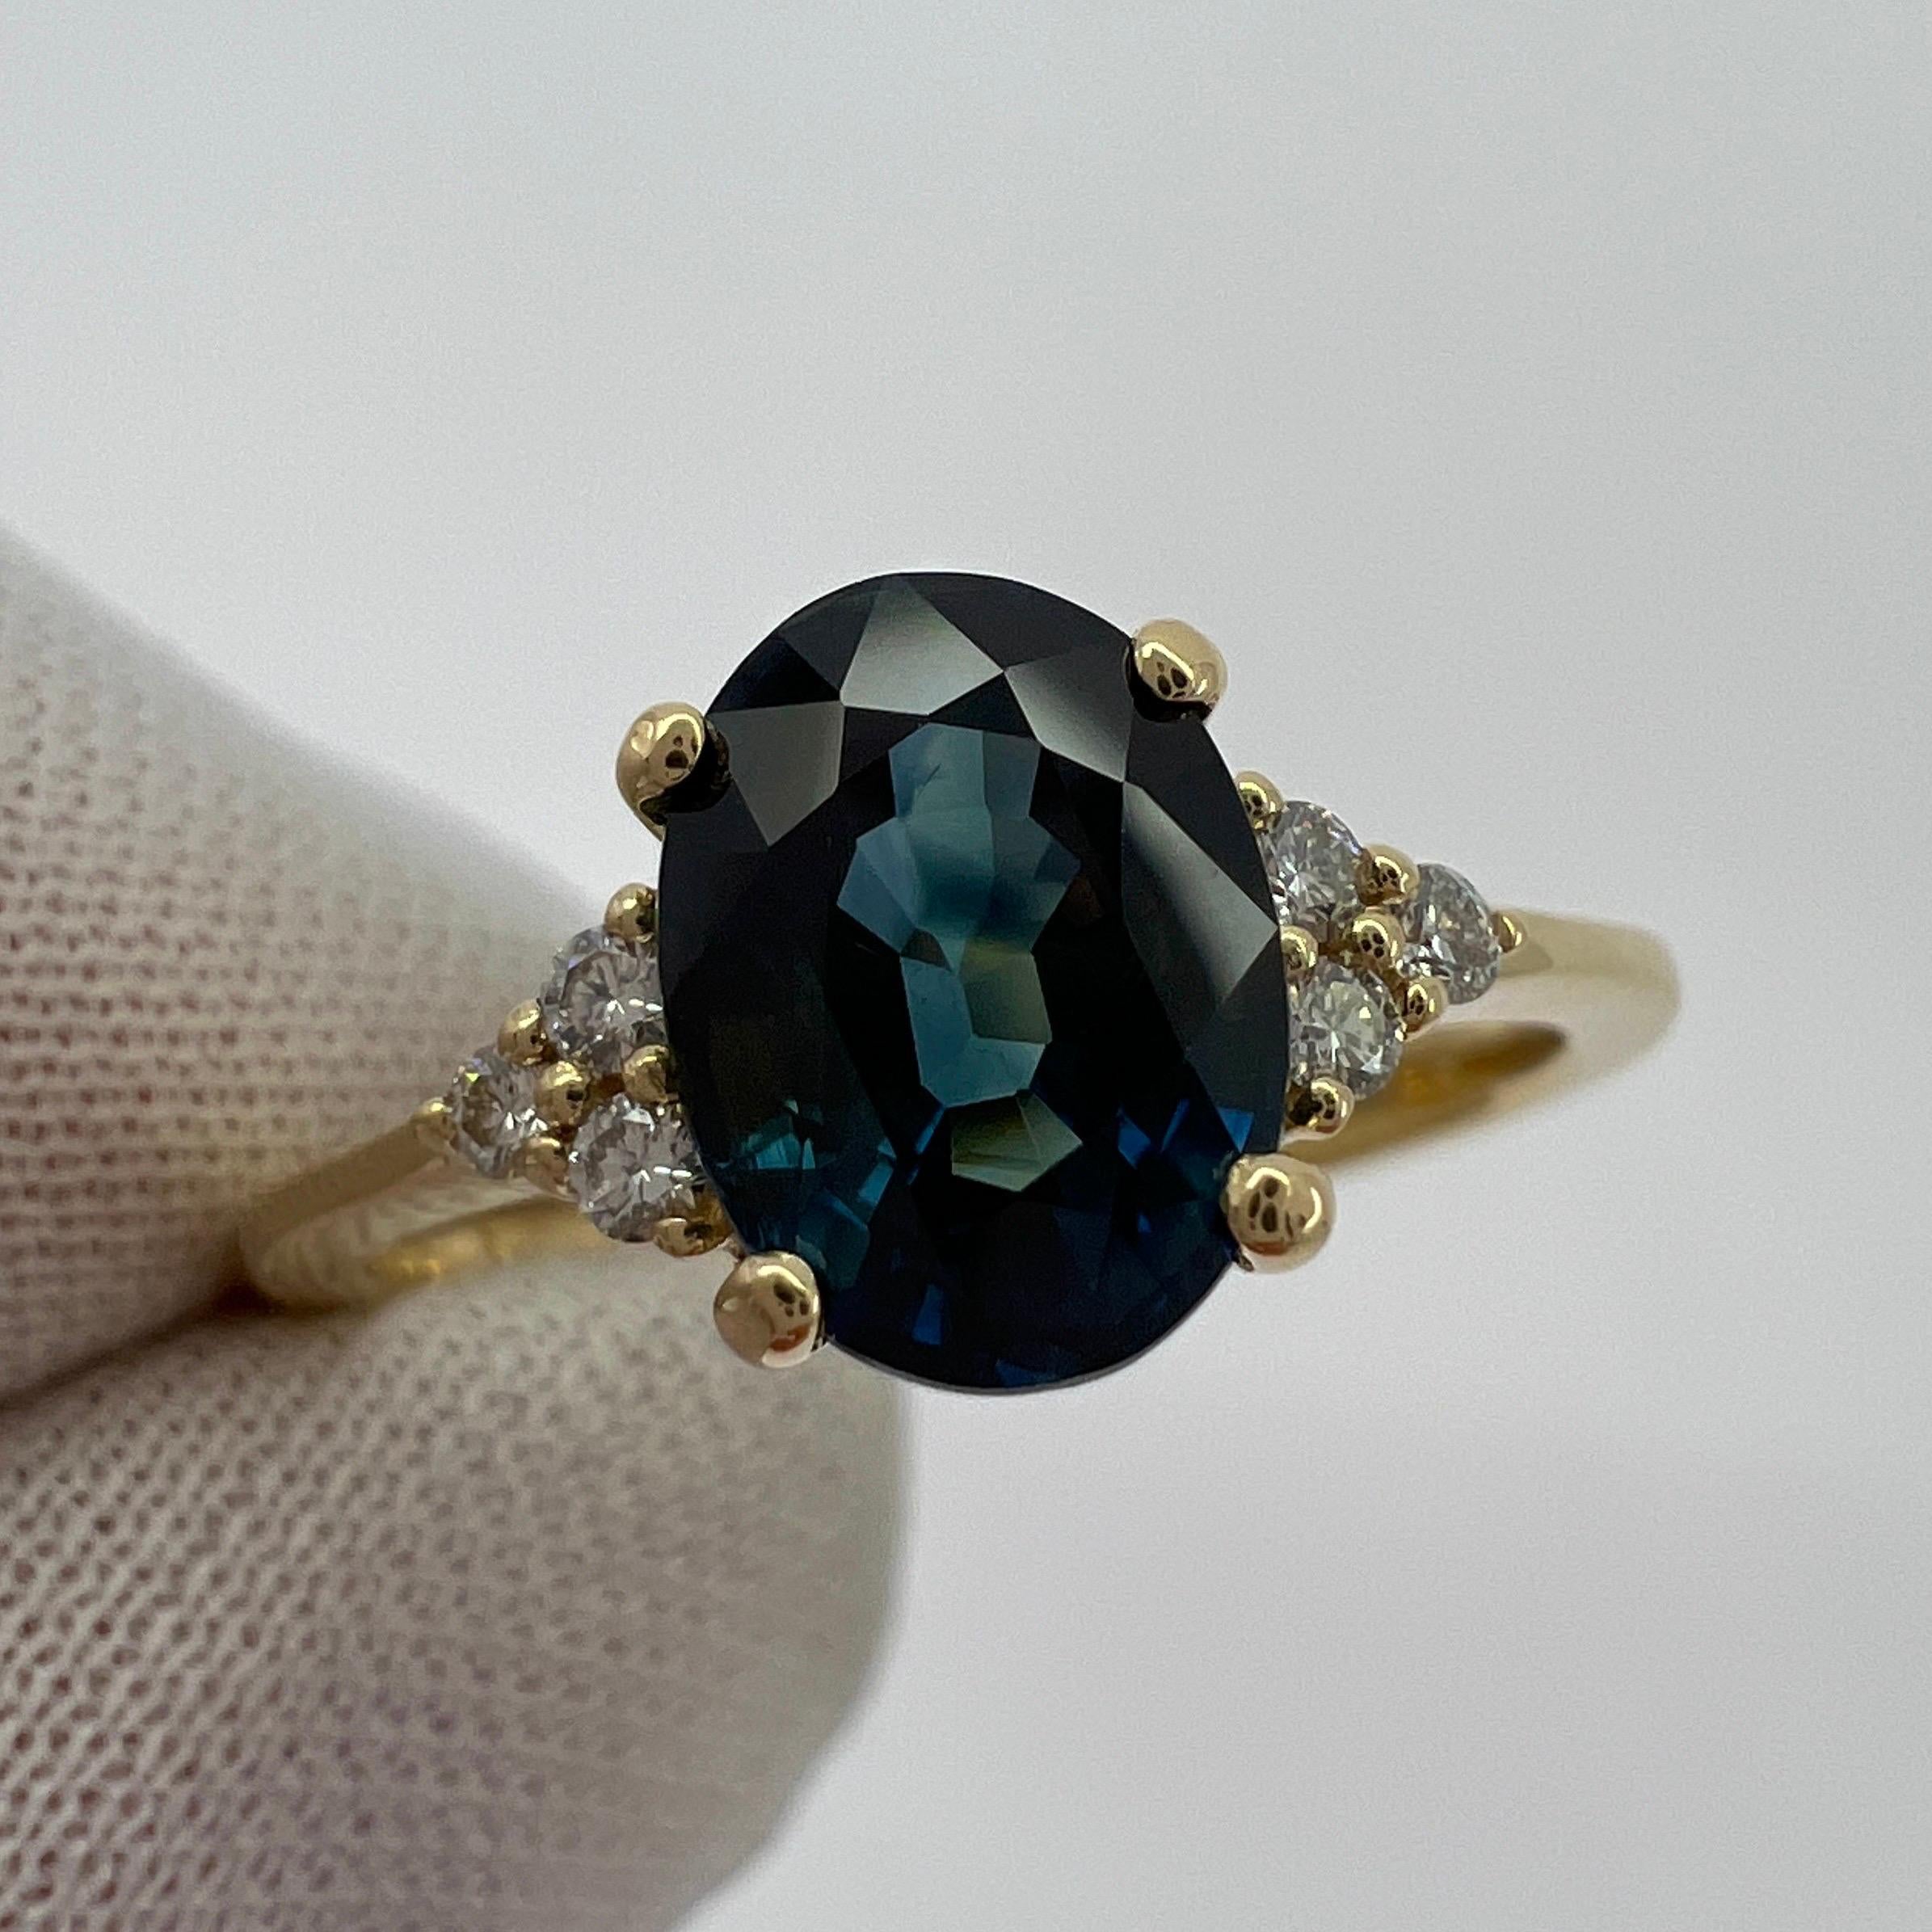 Deep Teal Blue Oval Cut Sapphire & Diamond 18k Yellow Gold Ring.

Fine 1.71 carat sapphire with a beautiful deep teal blue colour.  Also has an excellent oval cut and very good clarity. Measures 8x6mm.

Accented by 3 round brilliant cut diamonds